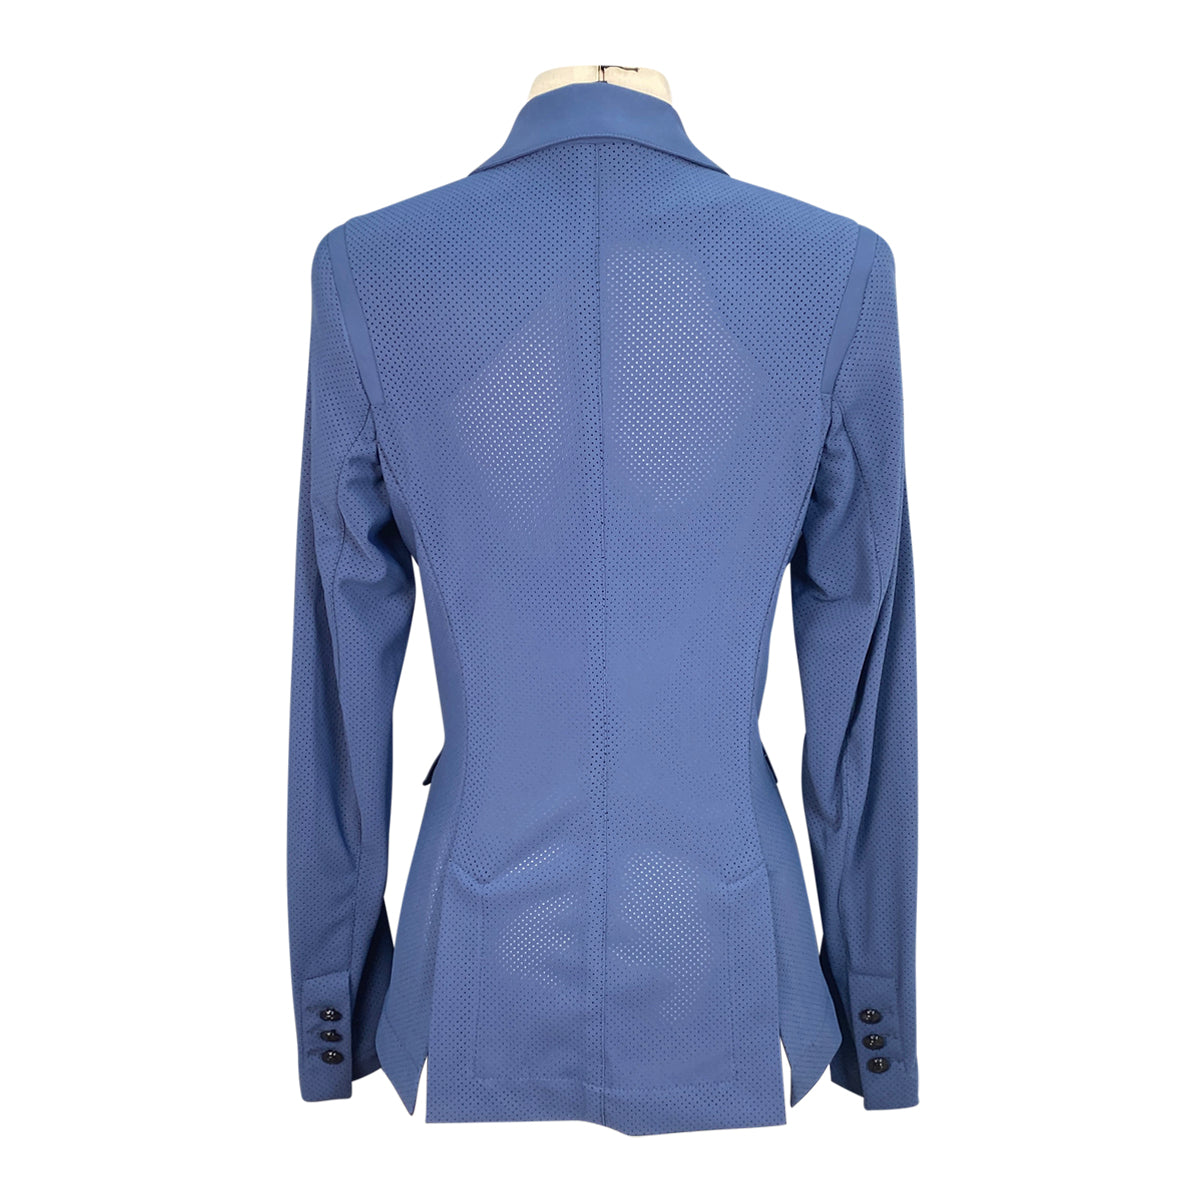 Cavalleria Toscana All Over Perforated Jacket in Atlantic Blue